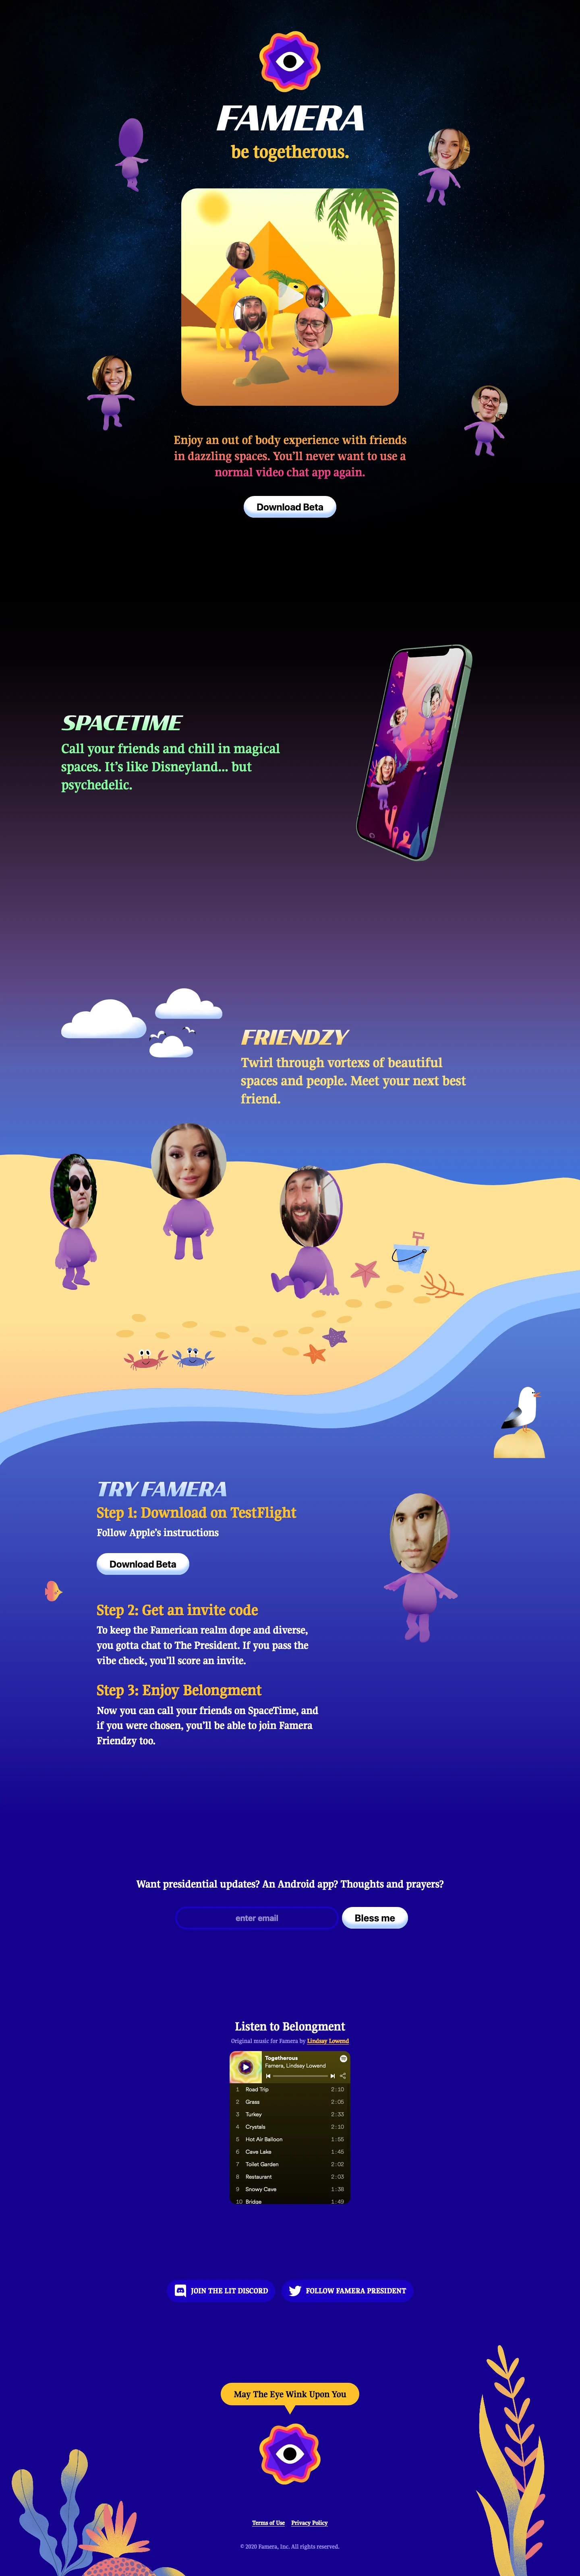 Famera Landing Page Example: Enjoy an out of body experience with friends in dazzling spaces. You’ll never want to use a normal video chat app again.